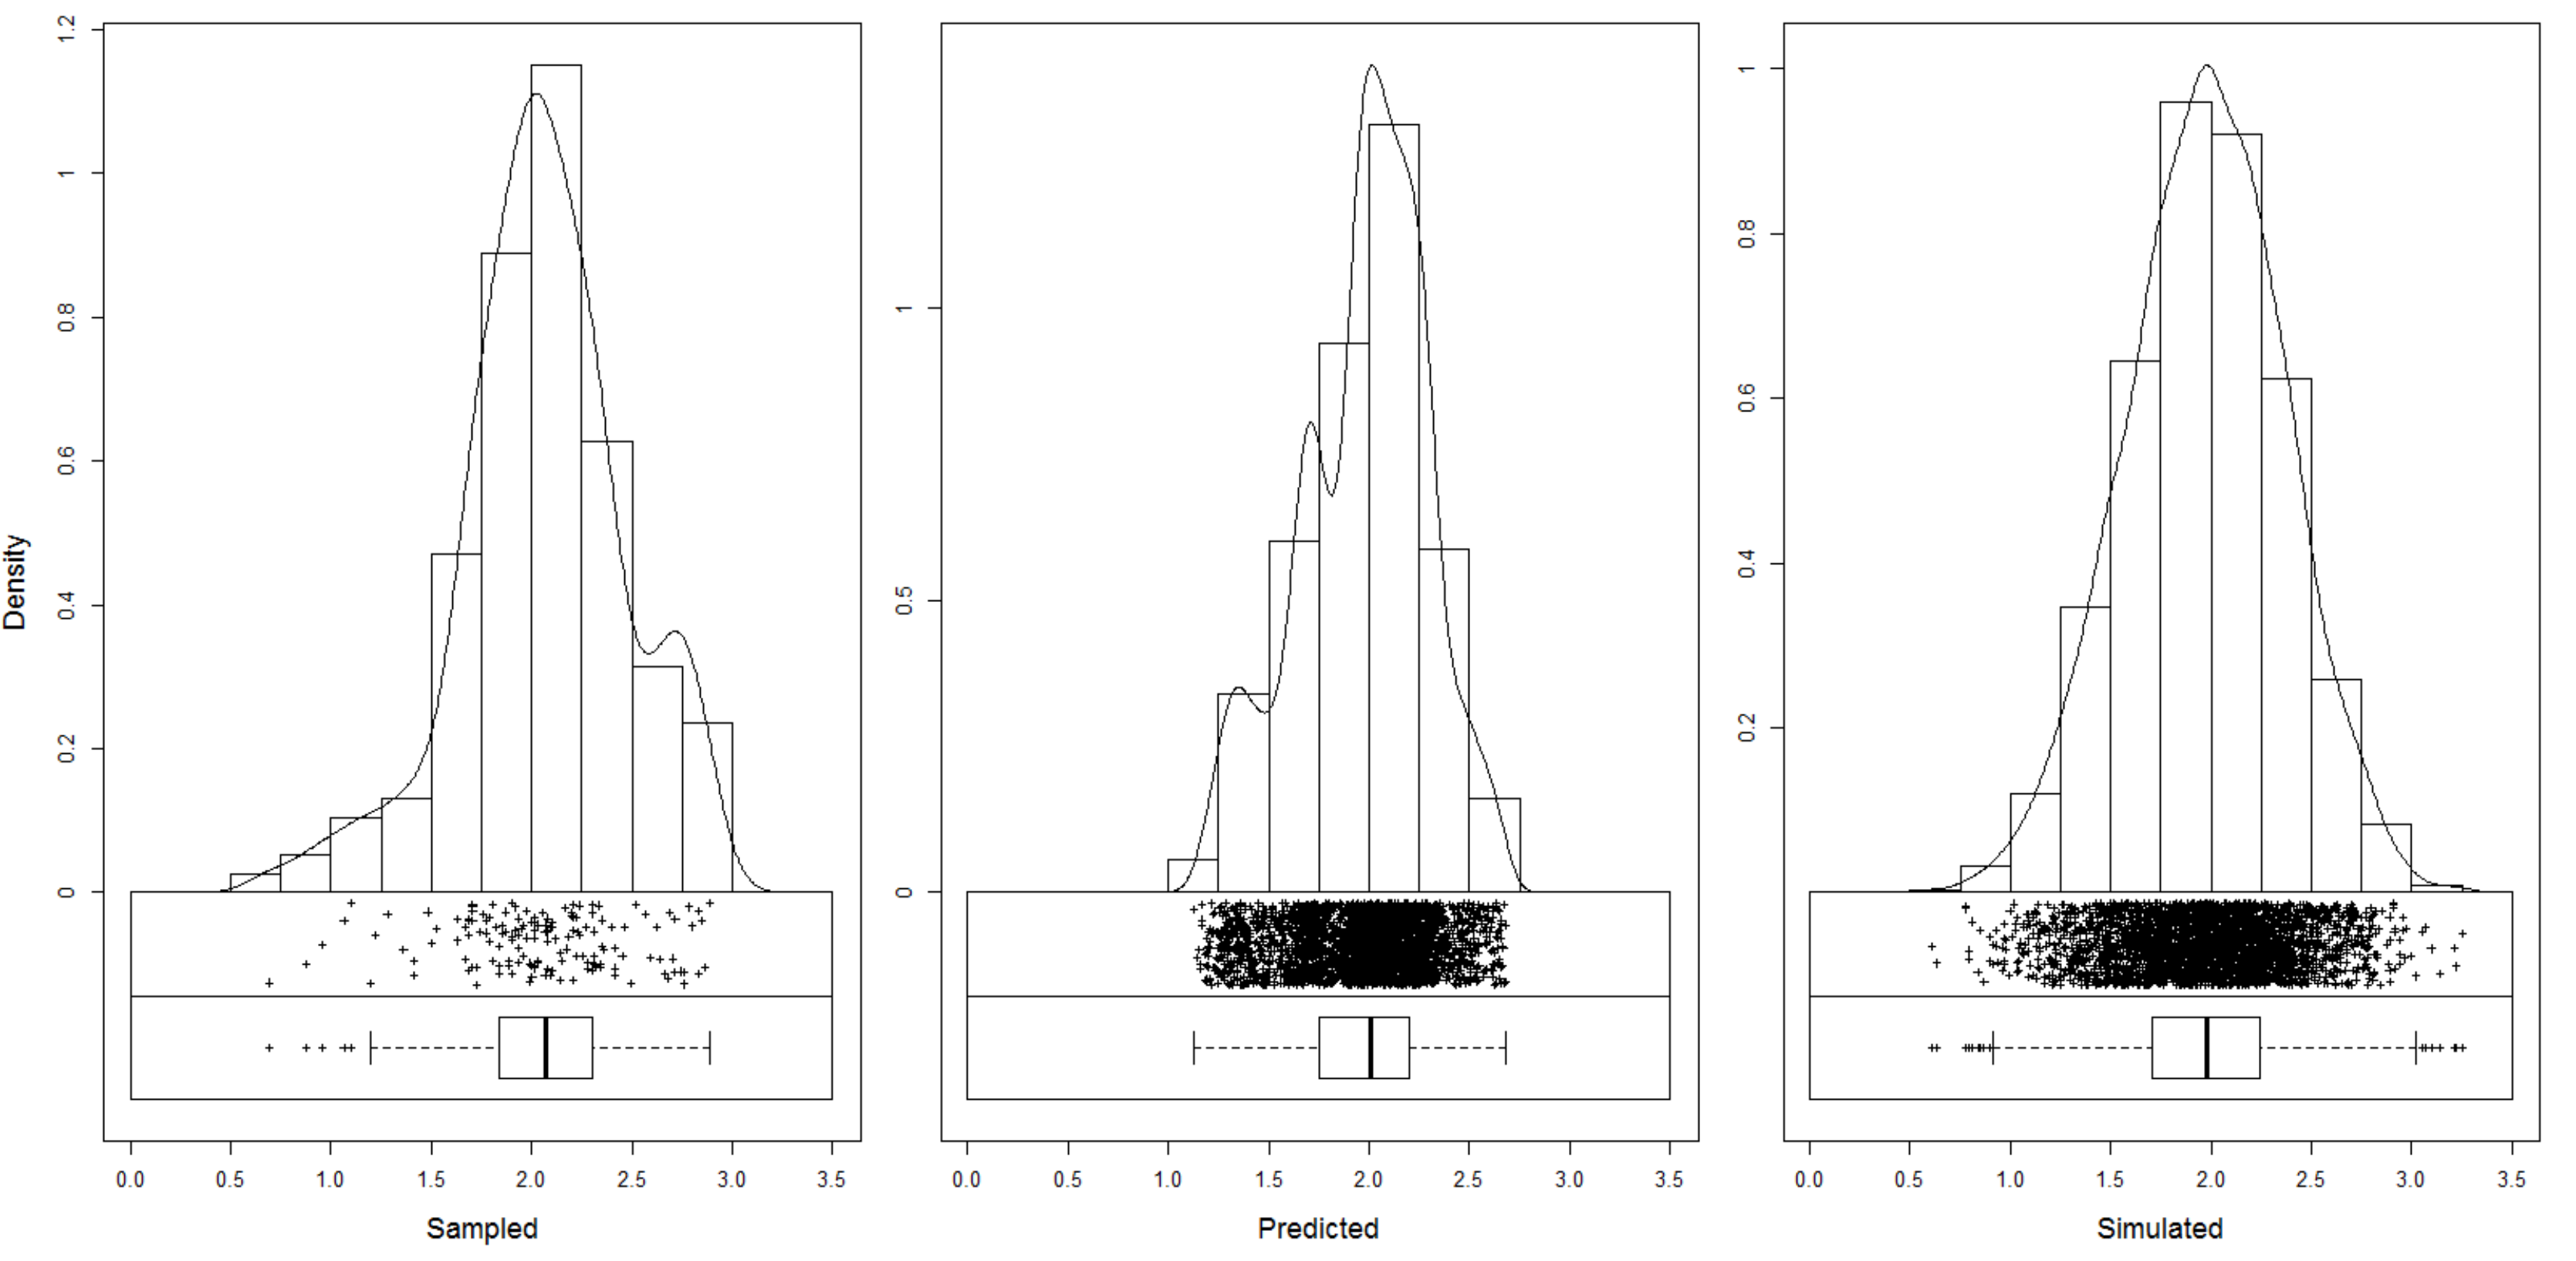 Histogram for the target variable (Meuse data set; log of organic matter) based on the actual observations (left), predictions at all grid nodes (middle) and simulations (right). Note that the histogram for predicted values will always show somewhat narrower distribution (smoothed), depending on the strength of the model, while the simulations should be able to reproduce the original range (for more discussion see also: Yamamoto et al. (2008)).